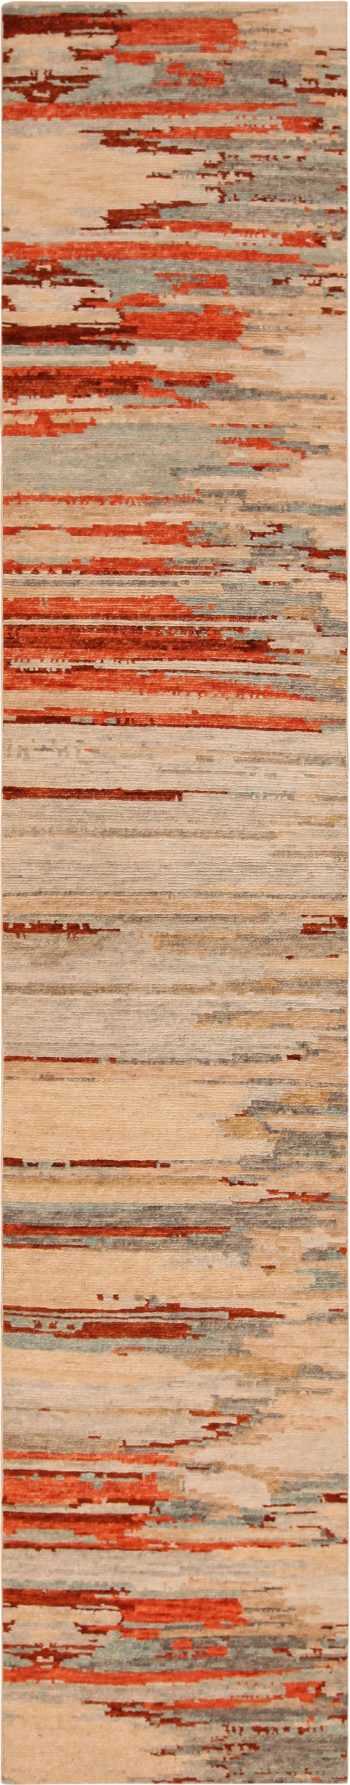 Modern Geometric Boutique Runner Rug 60979 by Nazmiyal Antique Rugs